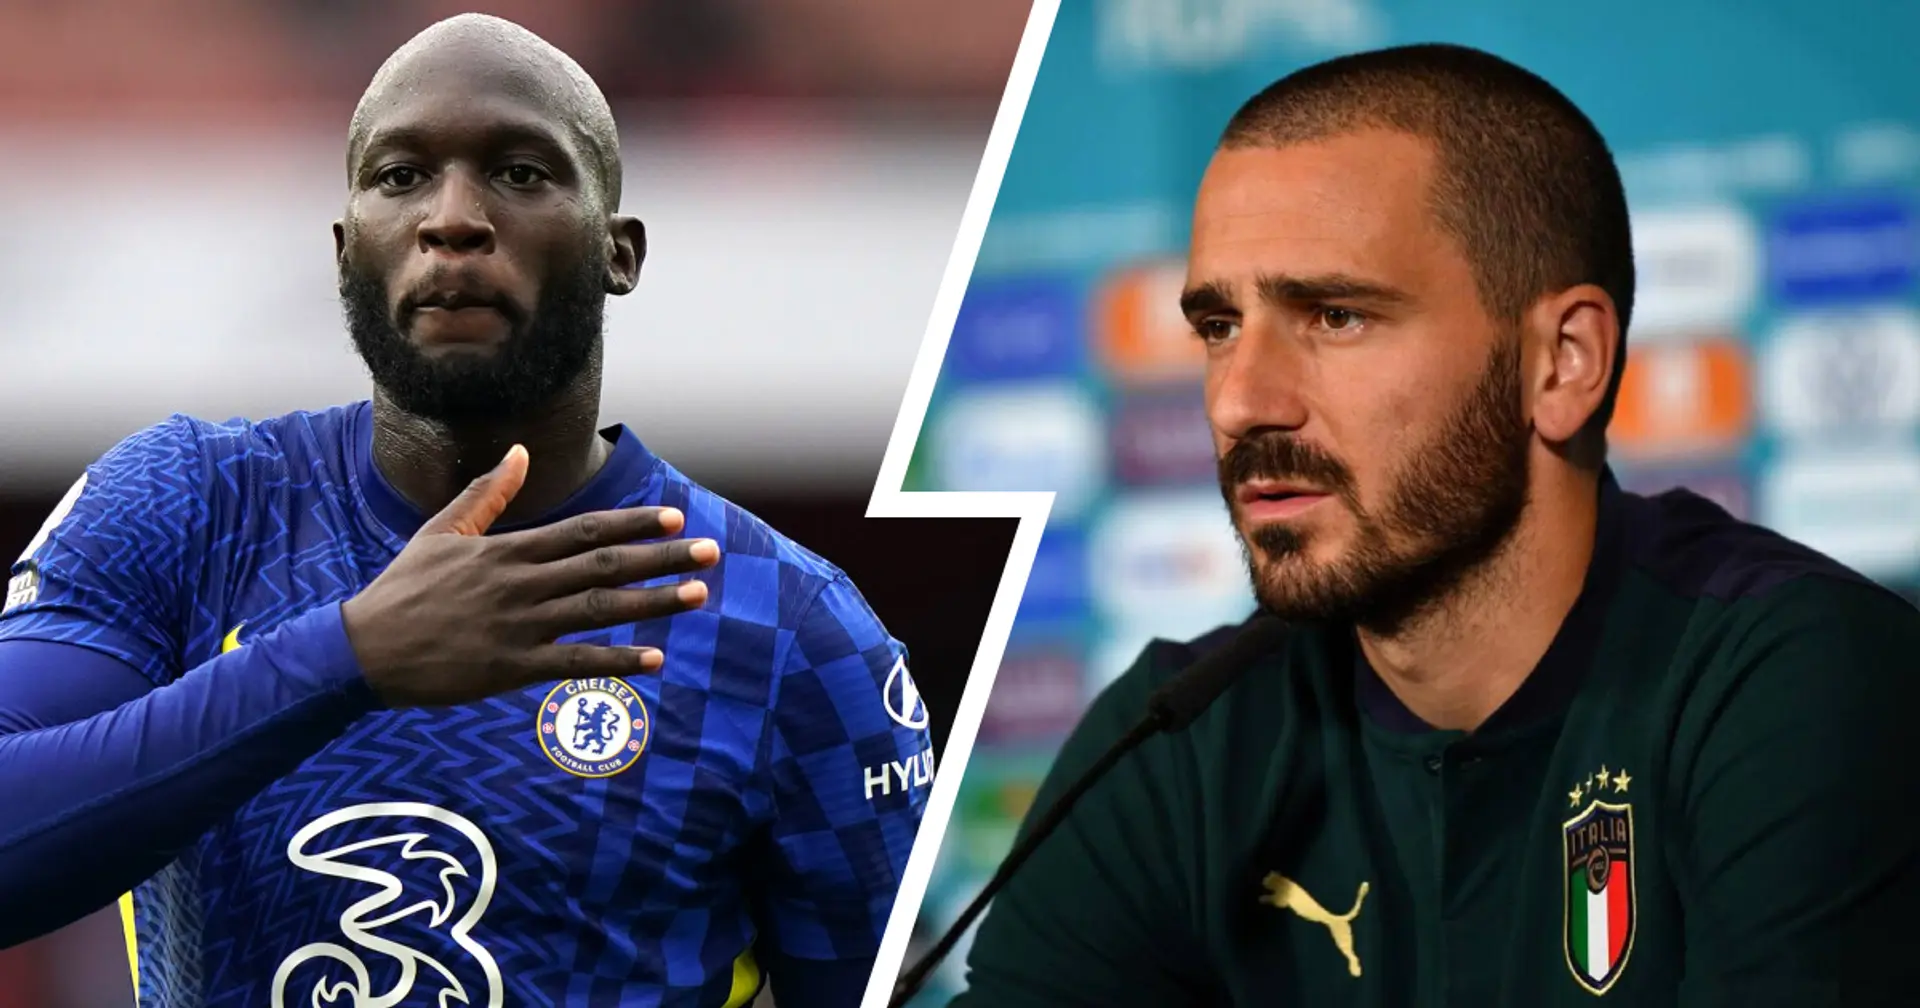 'Lukaku wins you games on his own, you can't switch off for even 10 seconds': Leonardo Bonucci